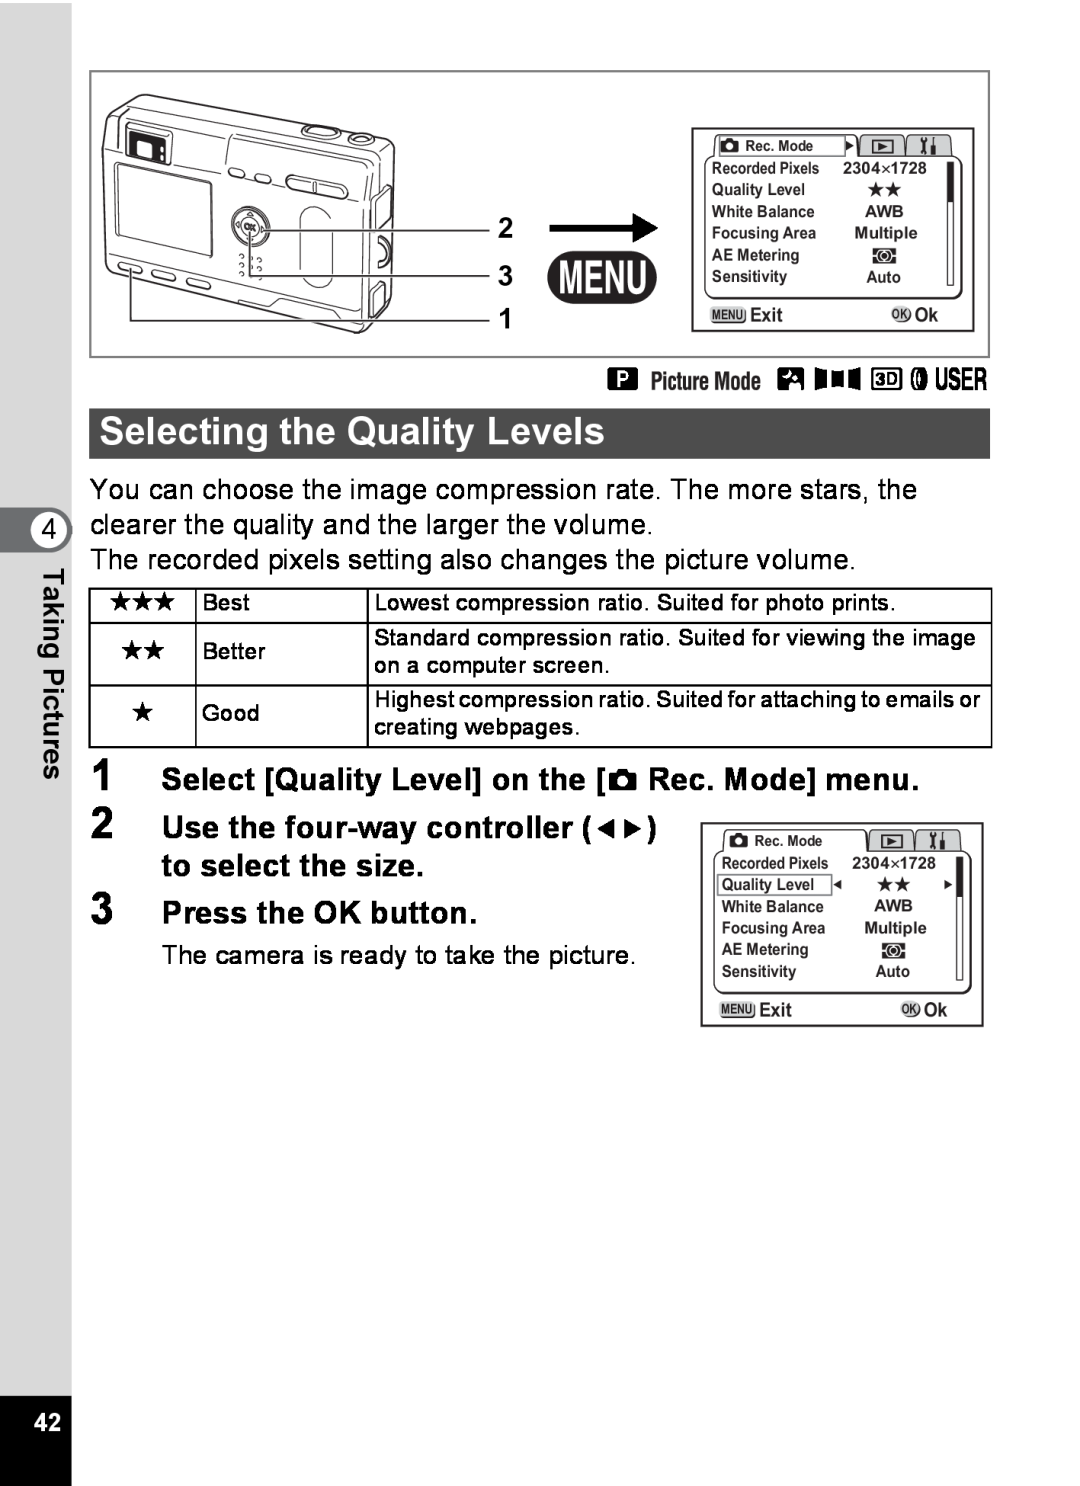 Pentax S4 Selecting the Quality Levels, Select Quality Level on the A Rec. Mode menu, Use the four-way controller, B F Gde 